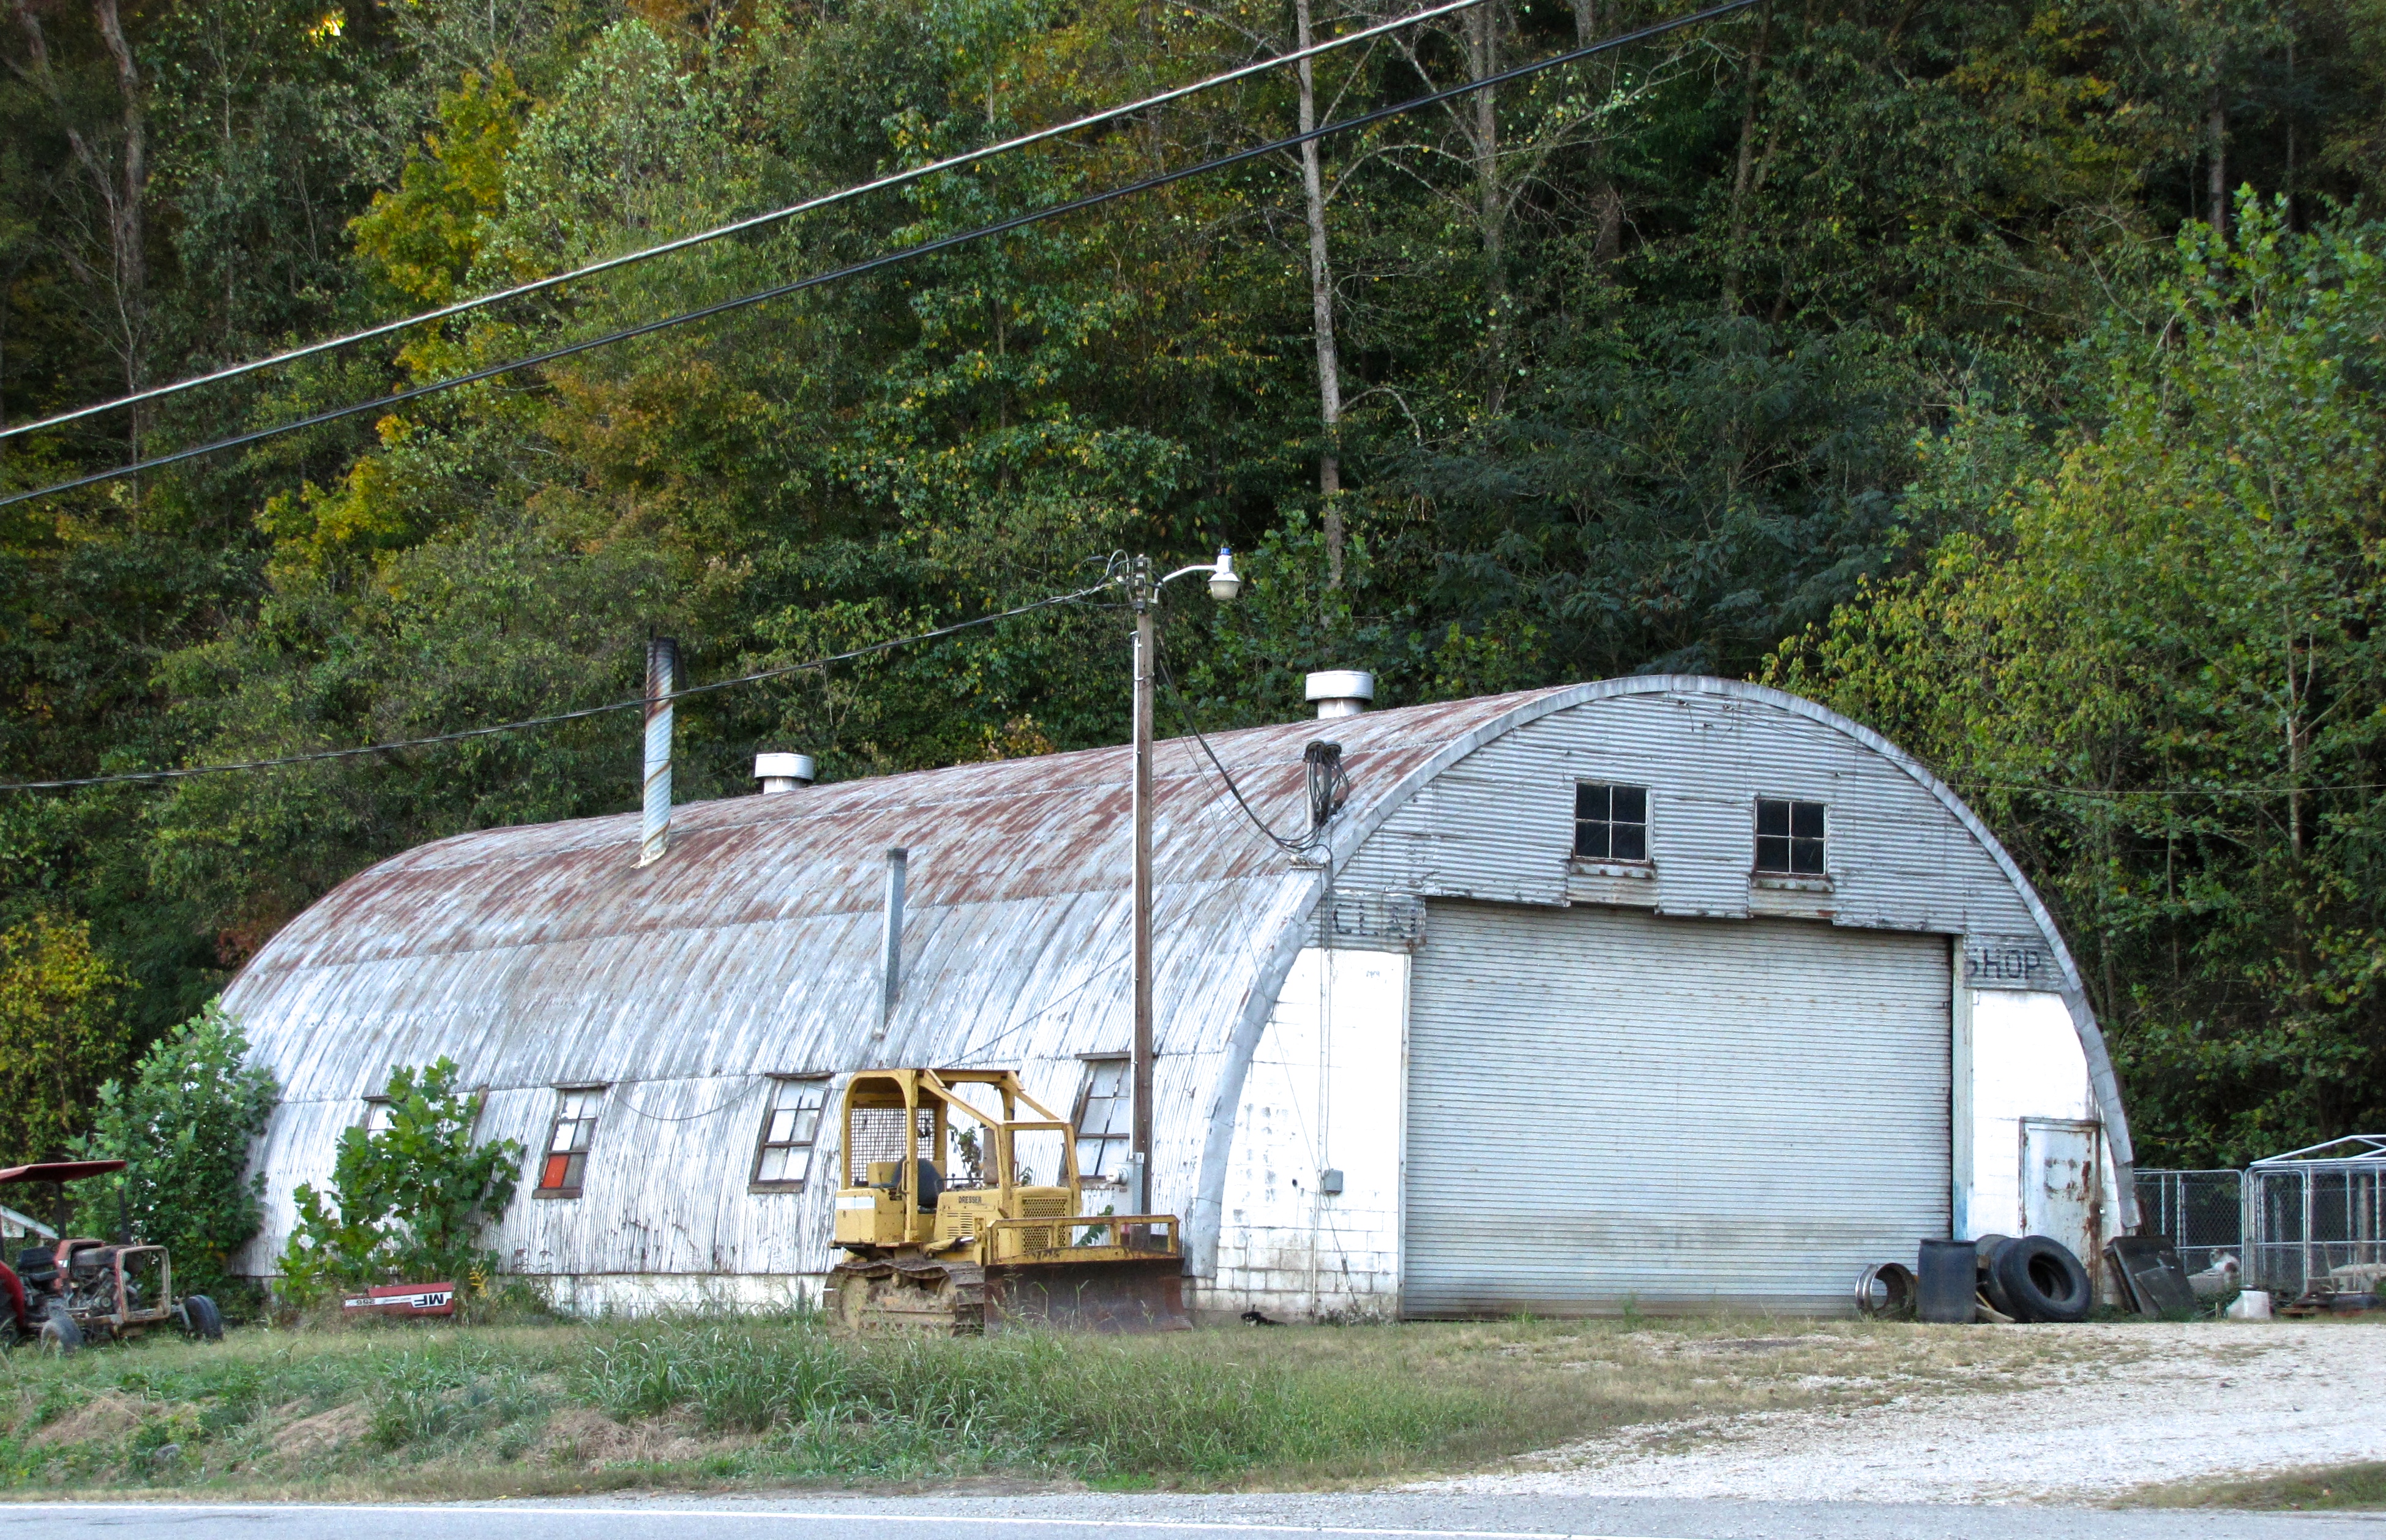 quonset hut in Bowling Green, KY